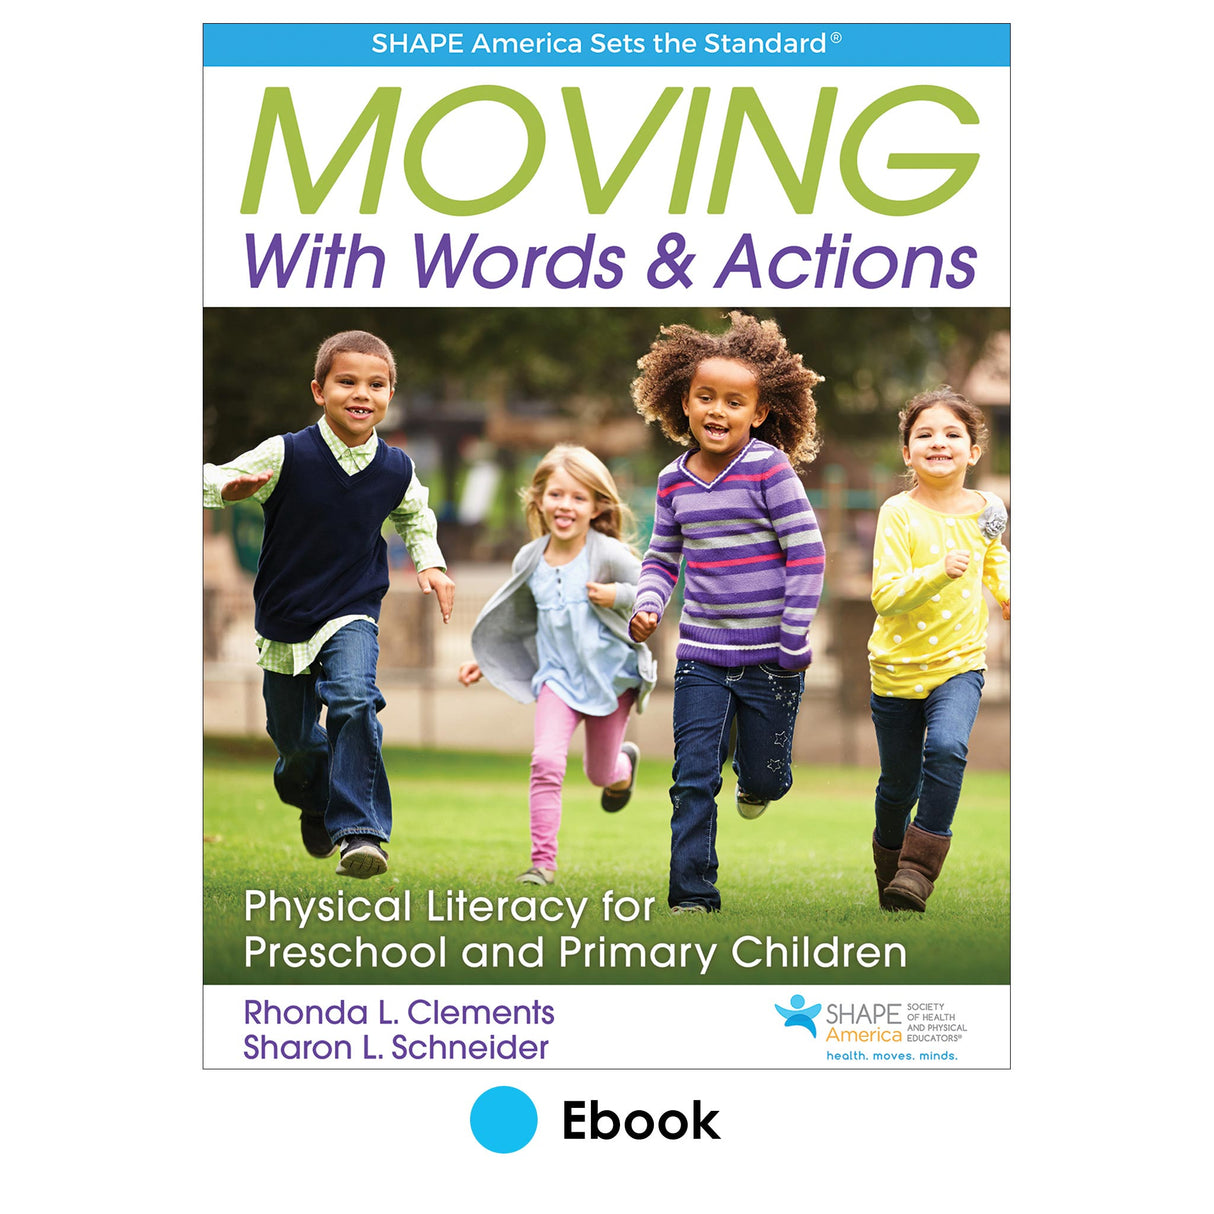 Moving With Words & Actions PDF